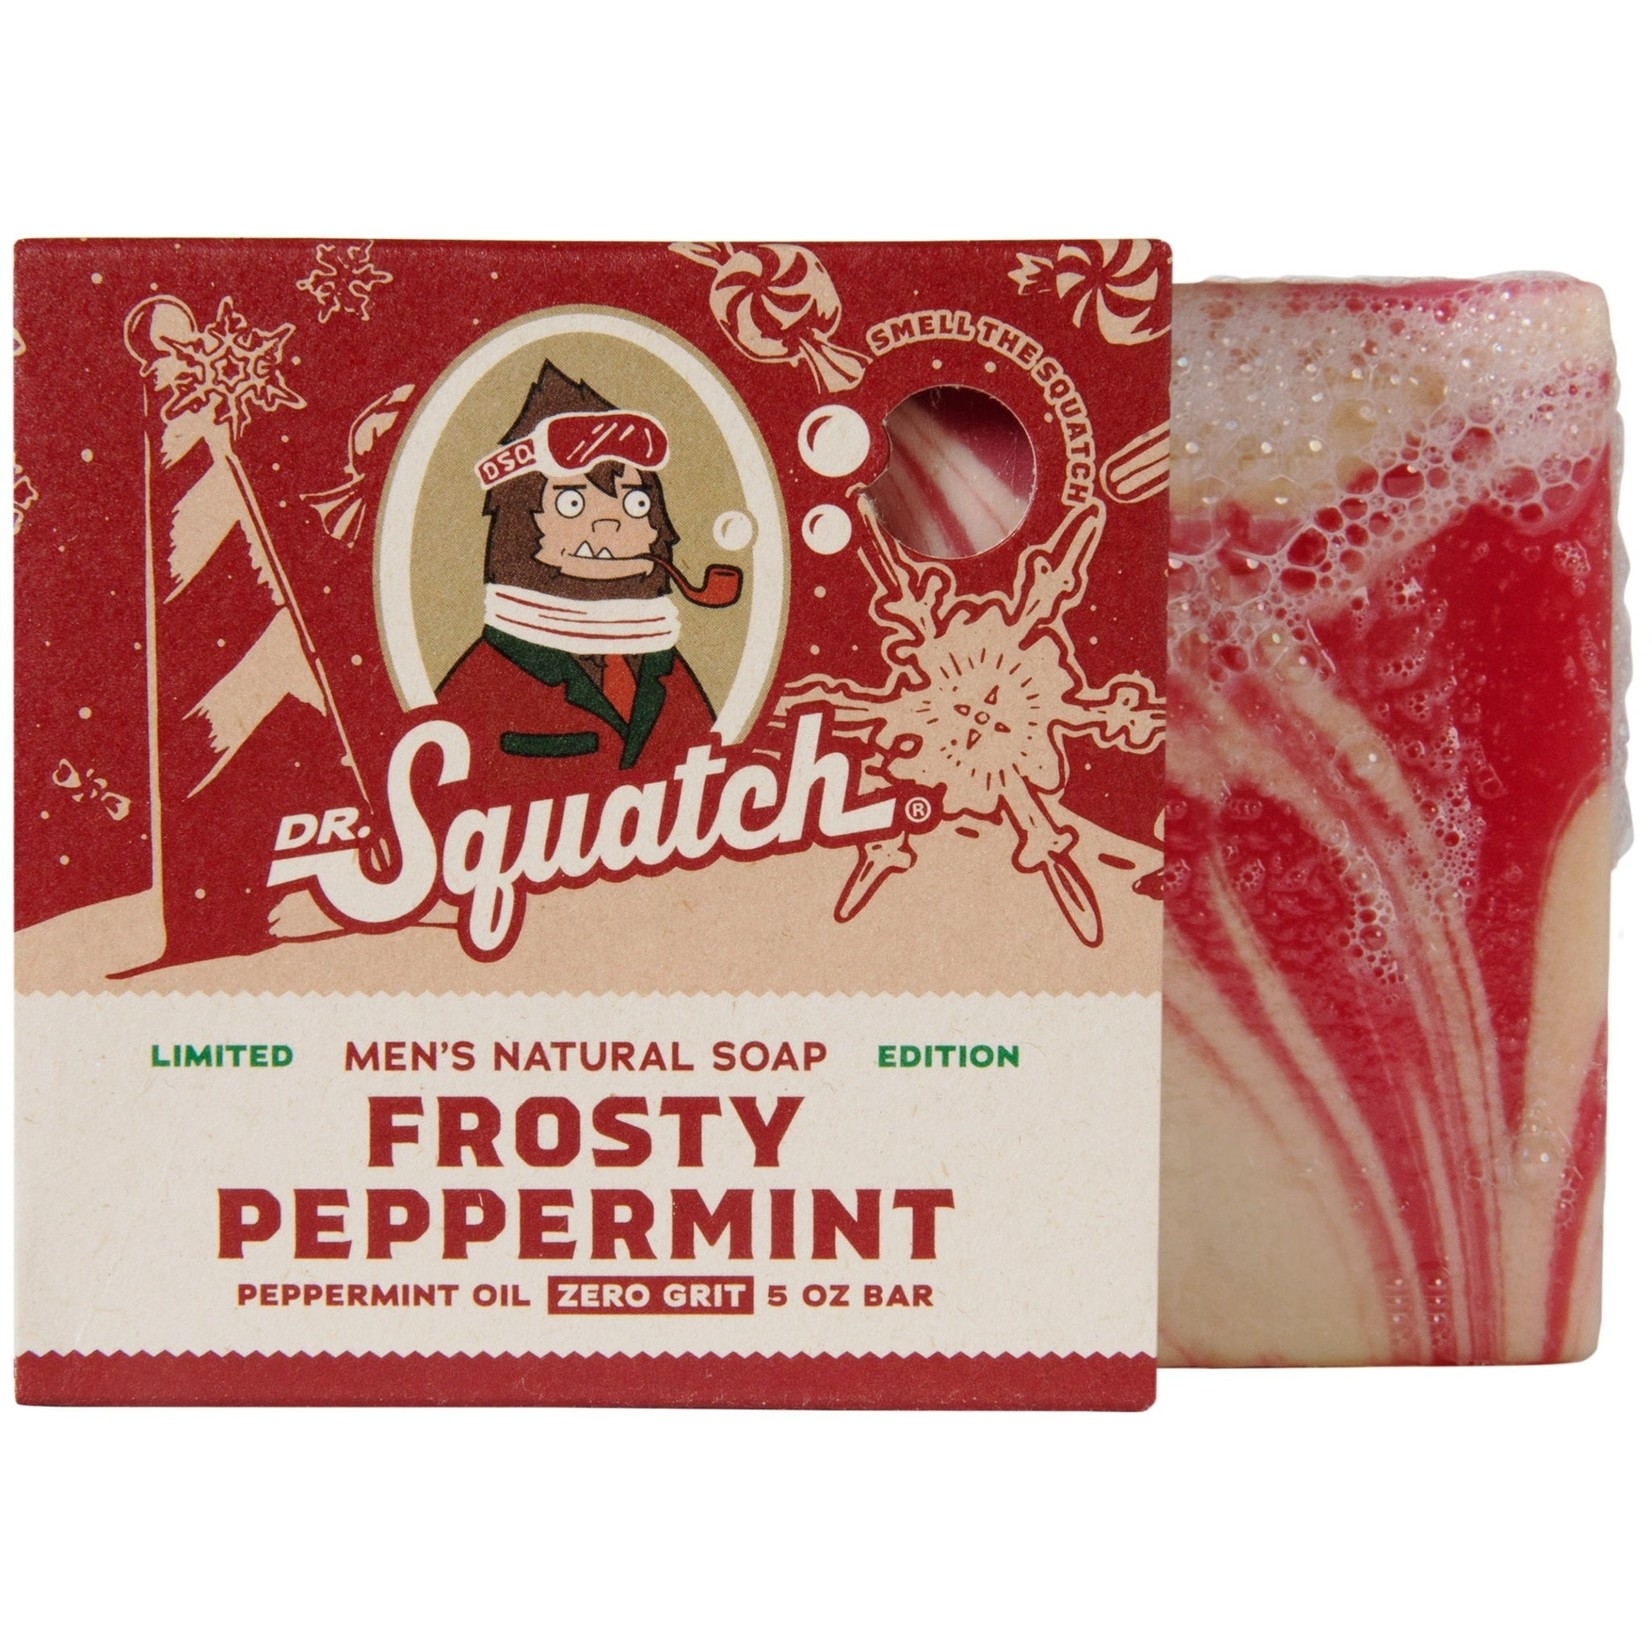 OG Frosty Peppermint Dr. Squatch Limited Edition Soap